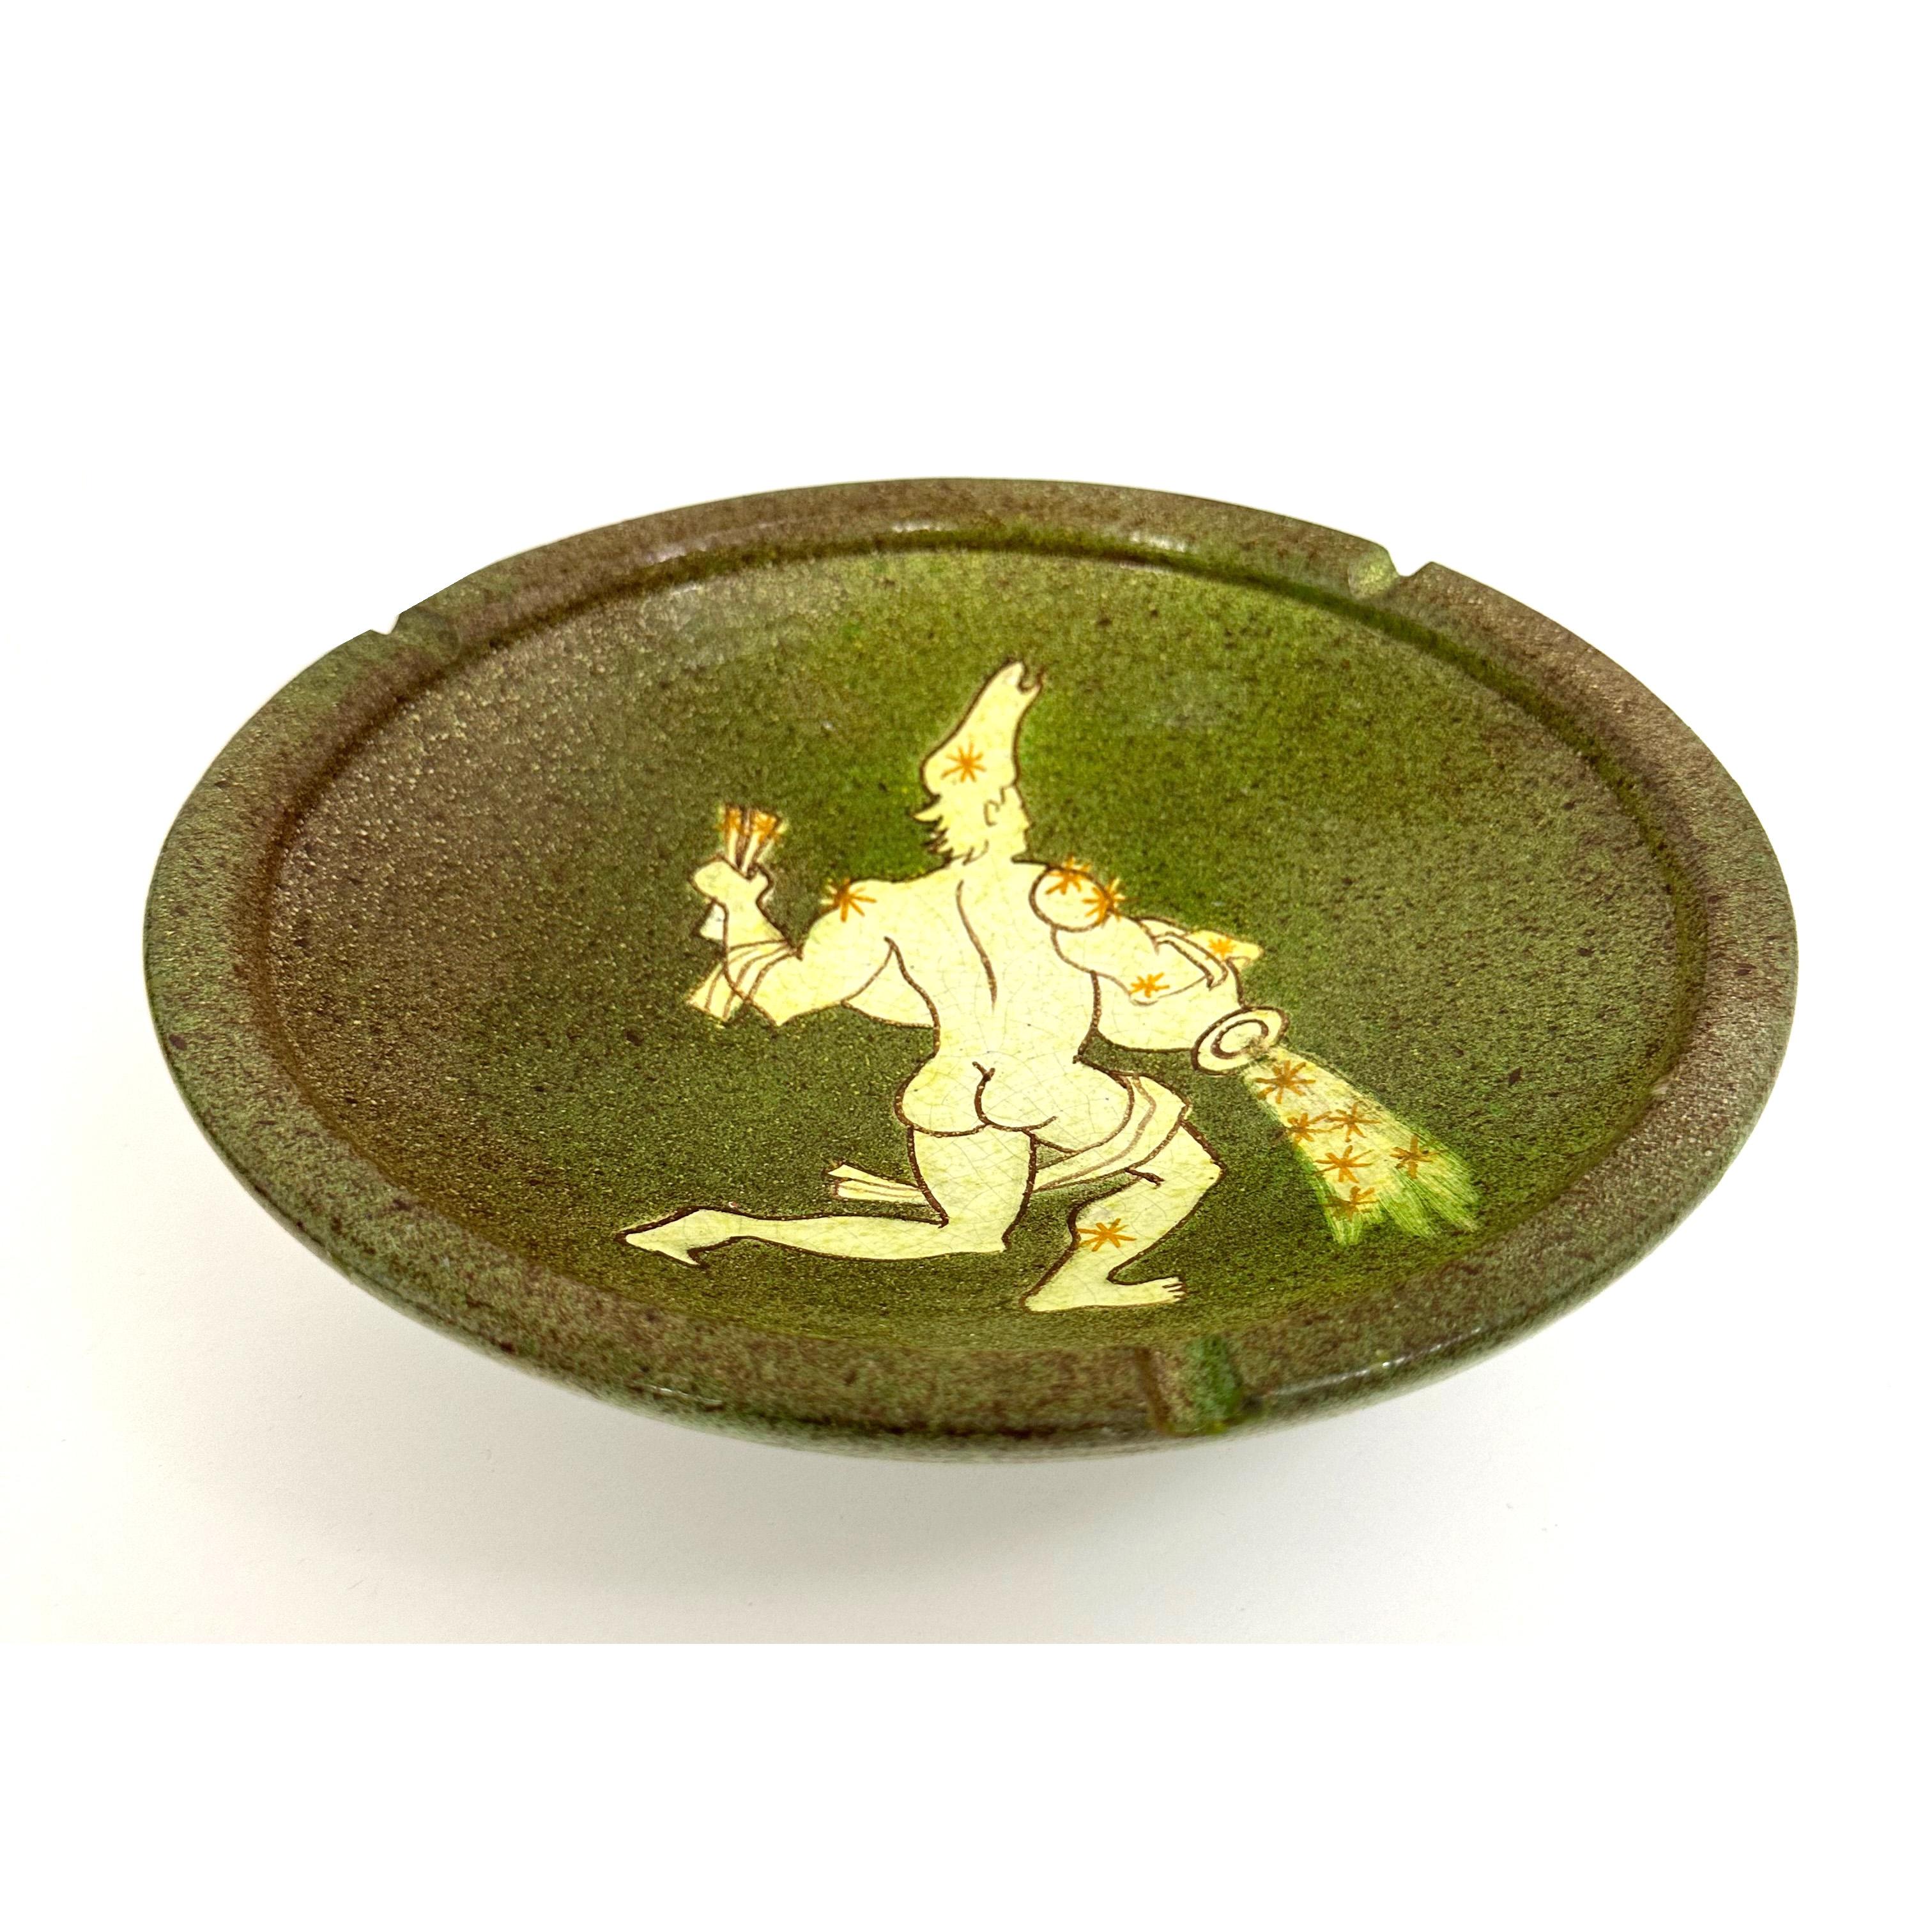 A decorative ashtray in the form of a pedestal bowl by the Alfaraz Company, founded in Spain in 1952. This is a wonderfully evocative and highly characteristic example of the work of ceramicist and Alfaraz founder Miguel Duran Lorica, who